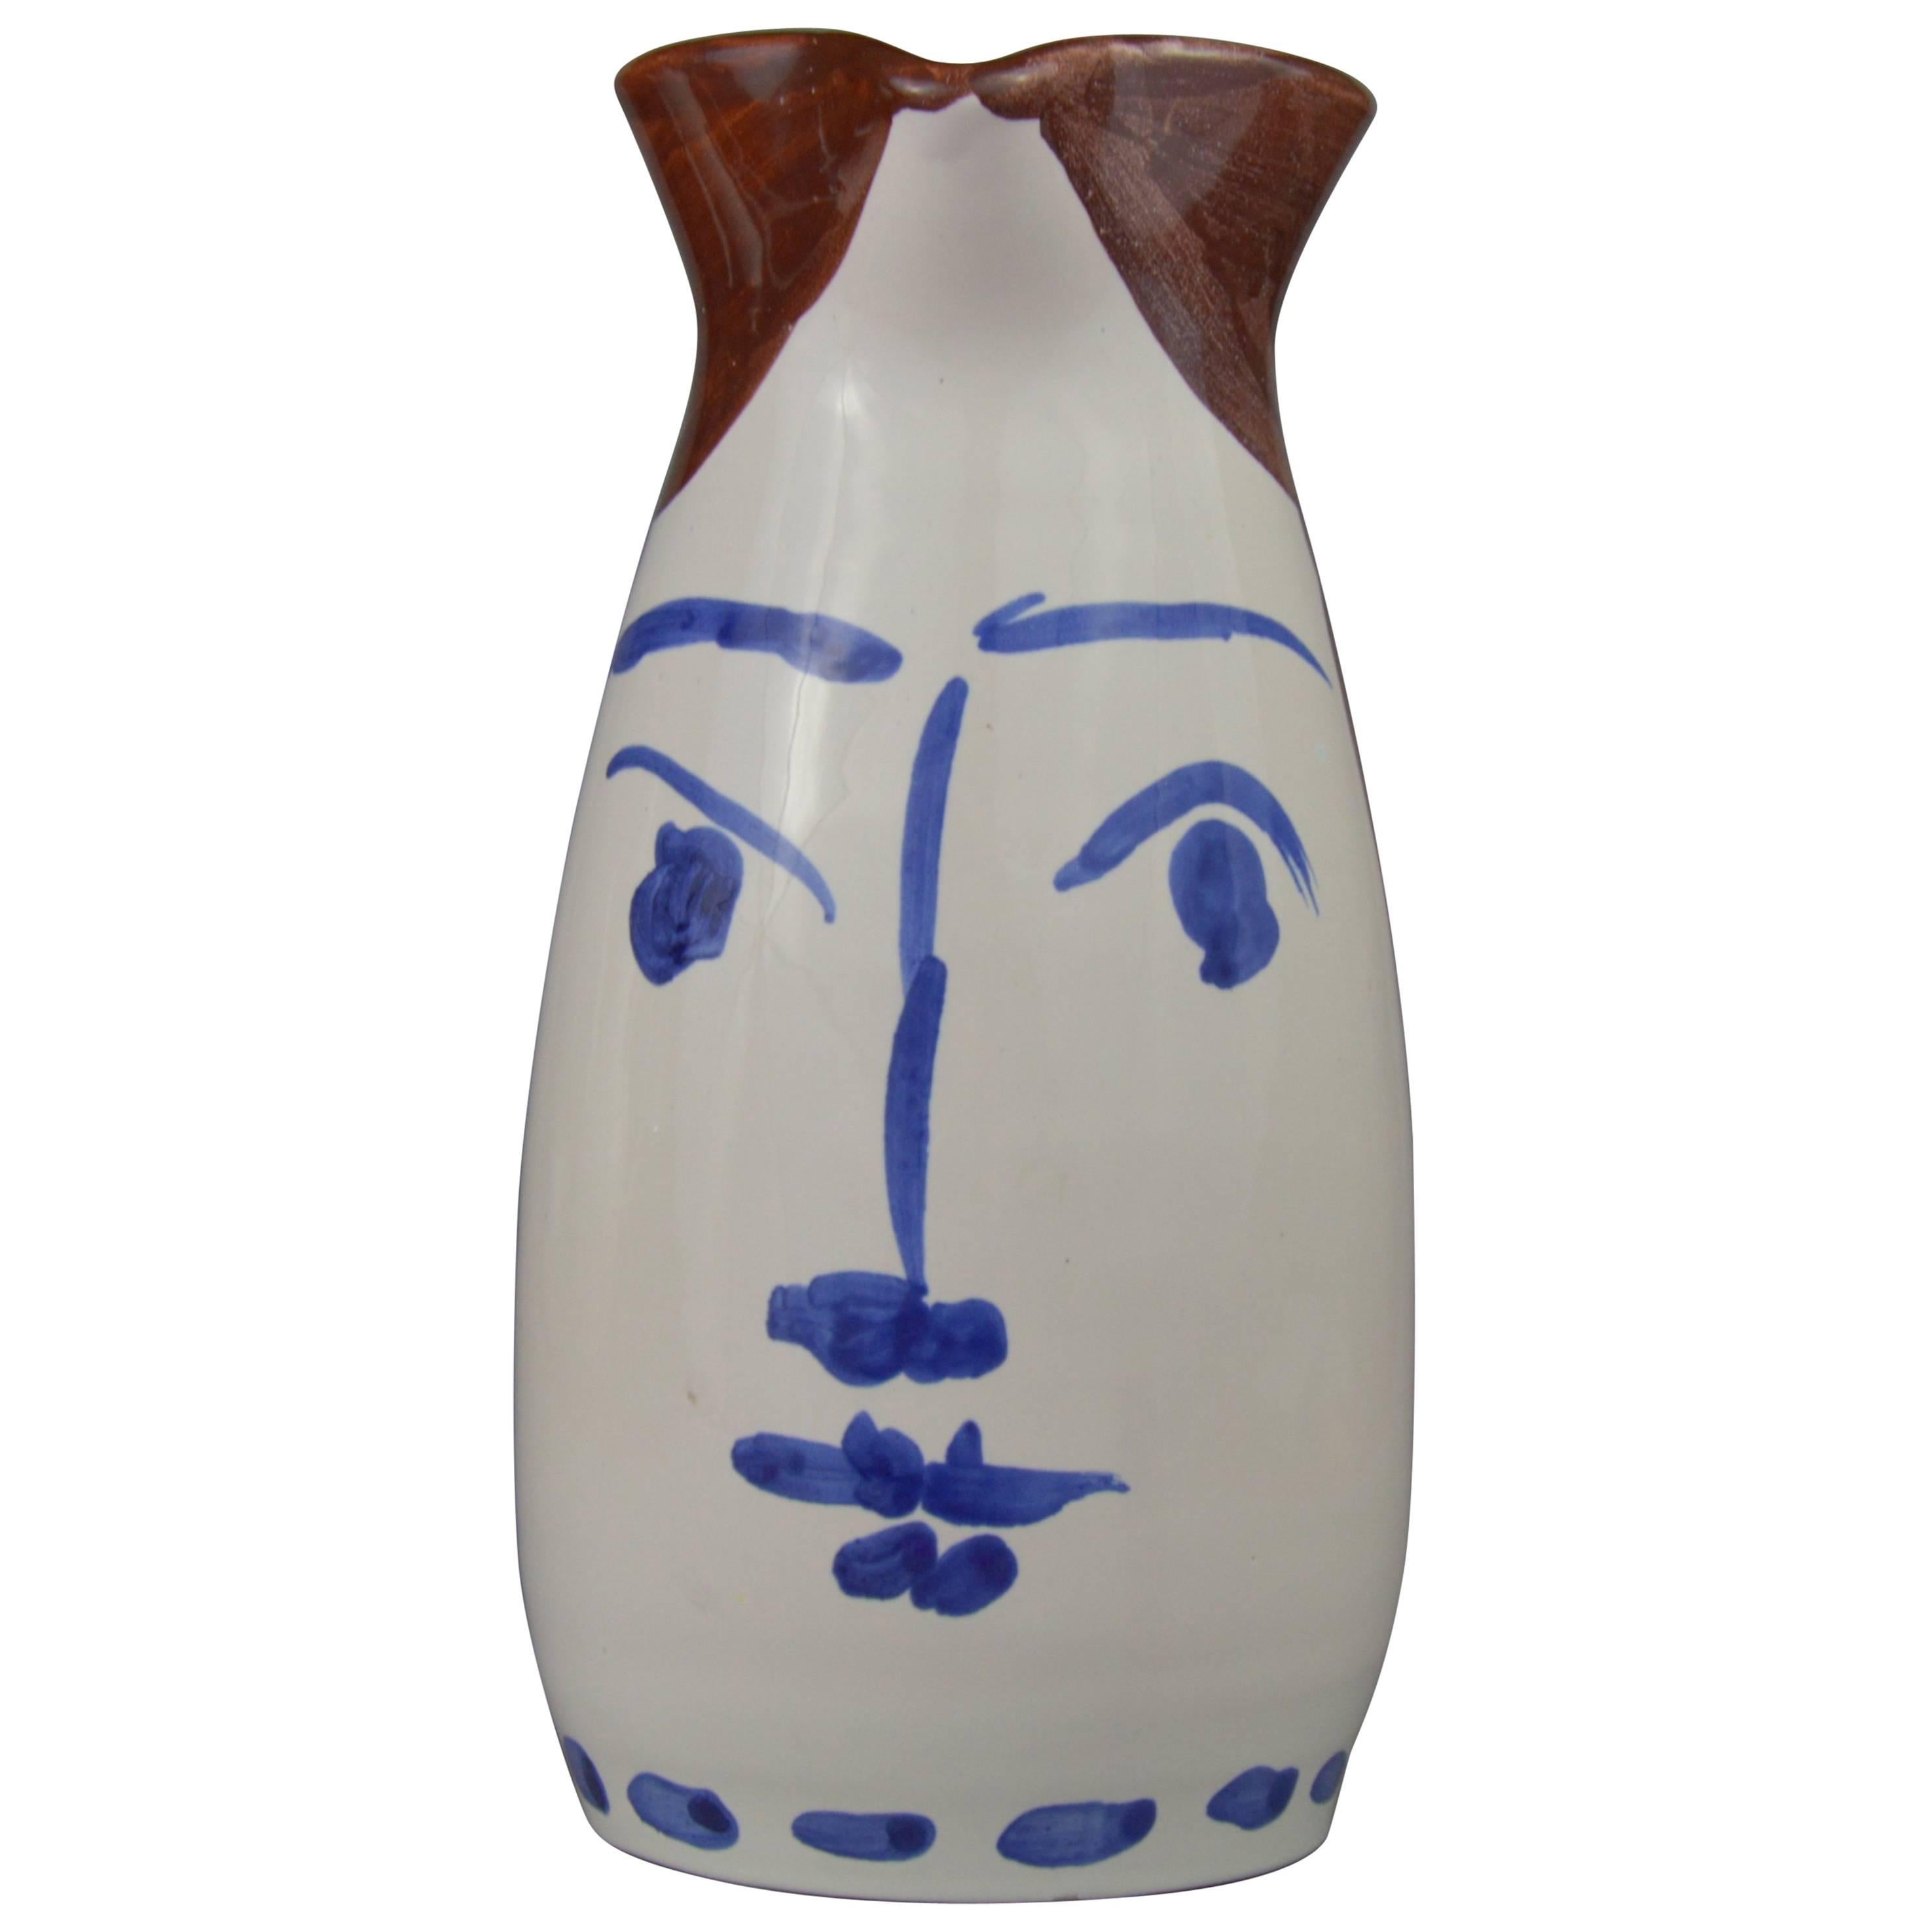 Pablo Picasso Madoura Ceramic Turned Pitcher Face Tankard, 1959 For Sale